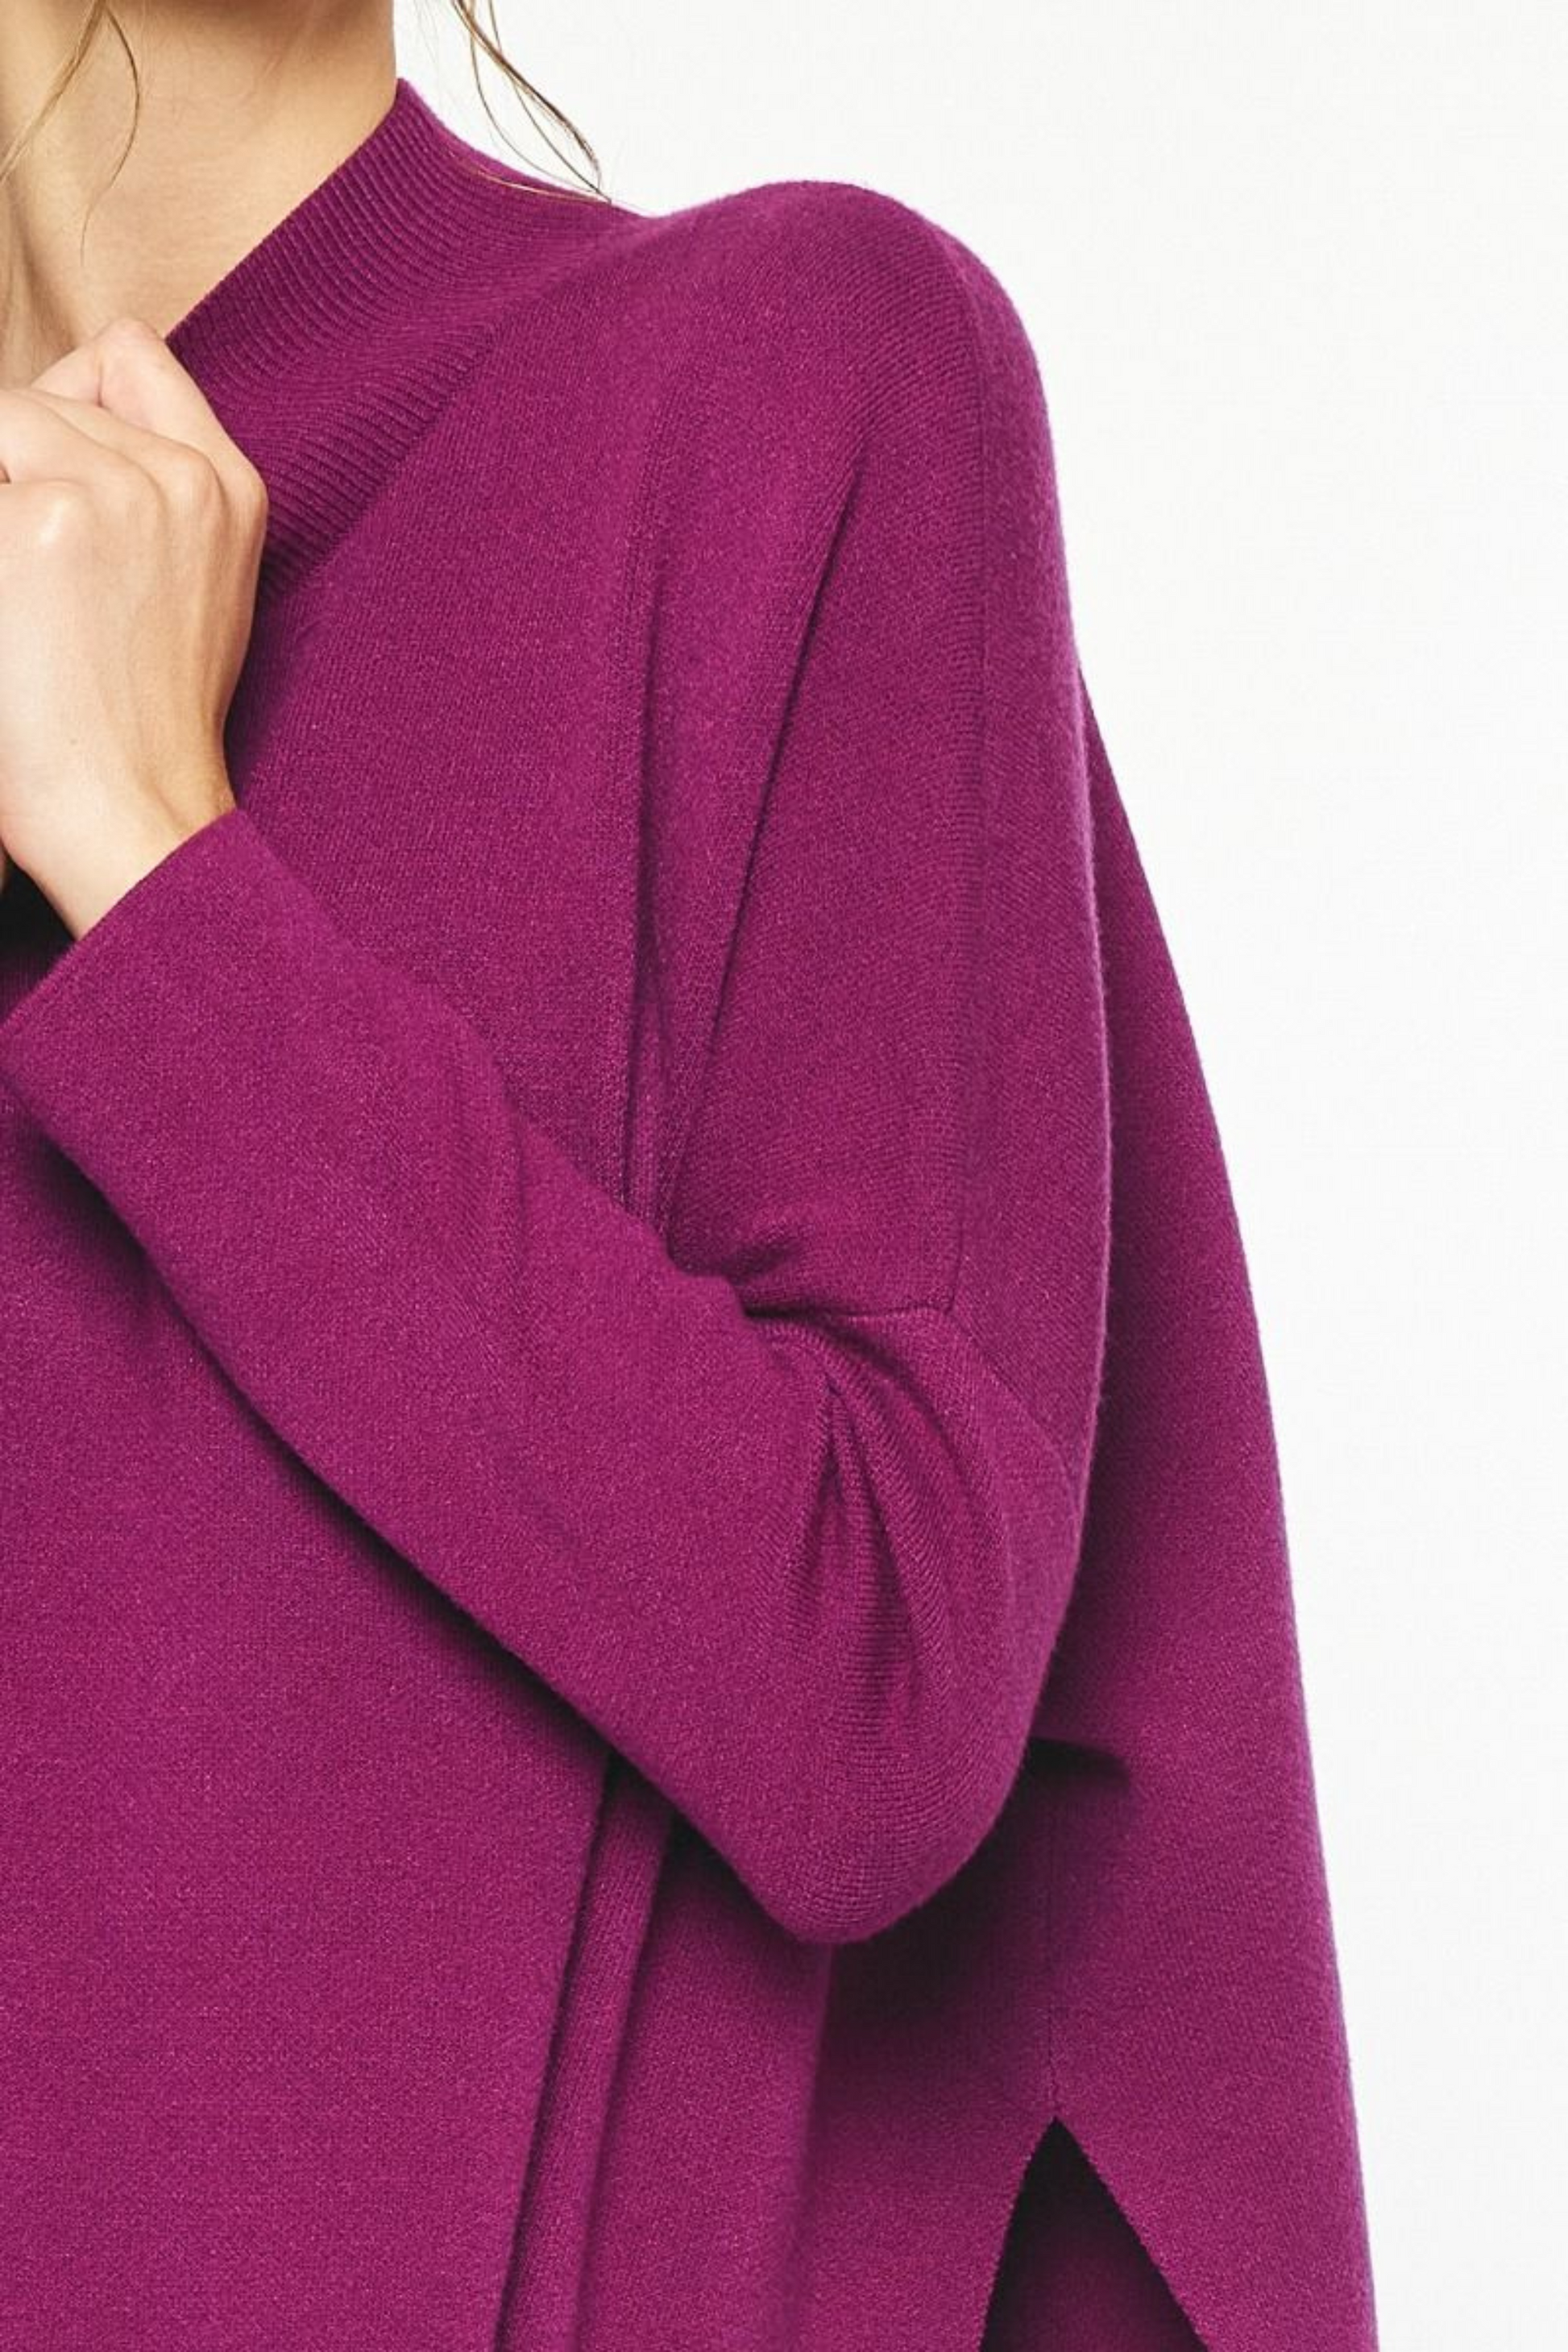 Kennedy Sweater - Simply Polished Boutique